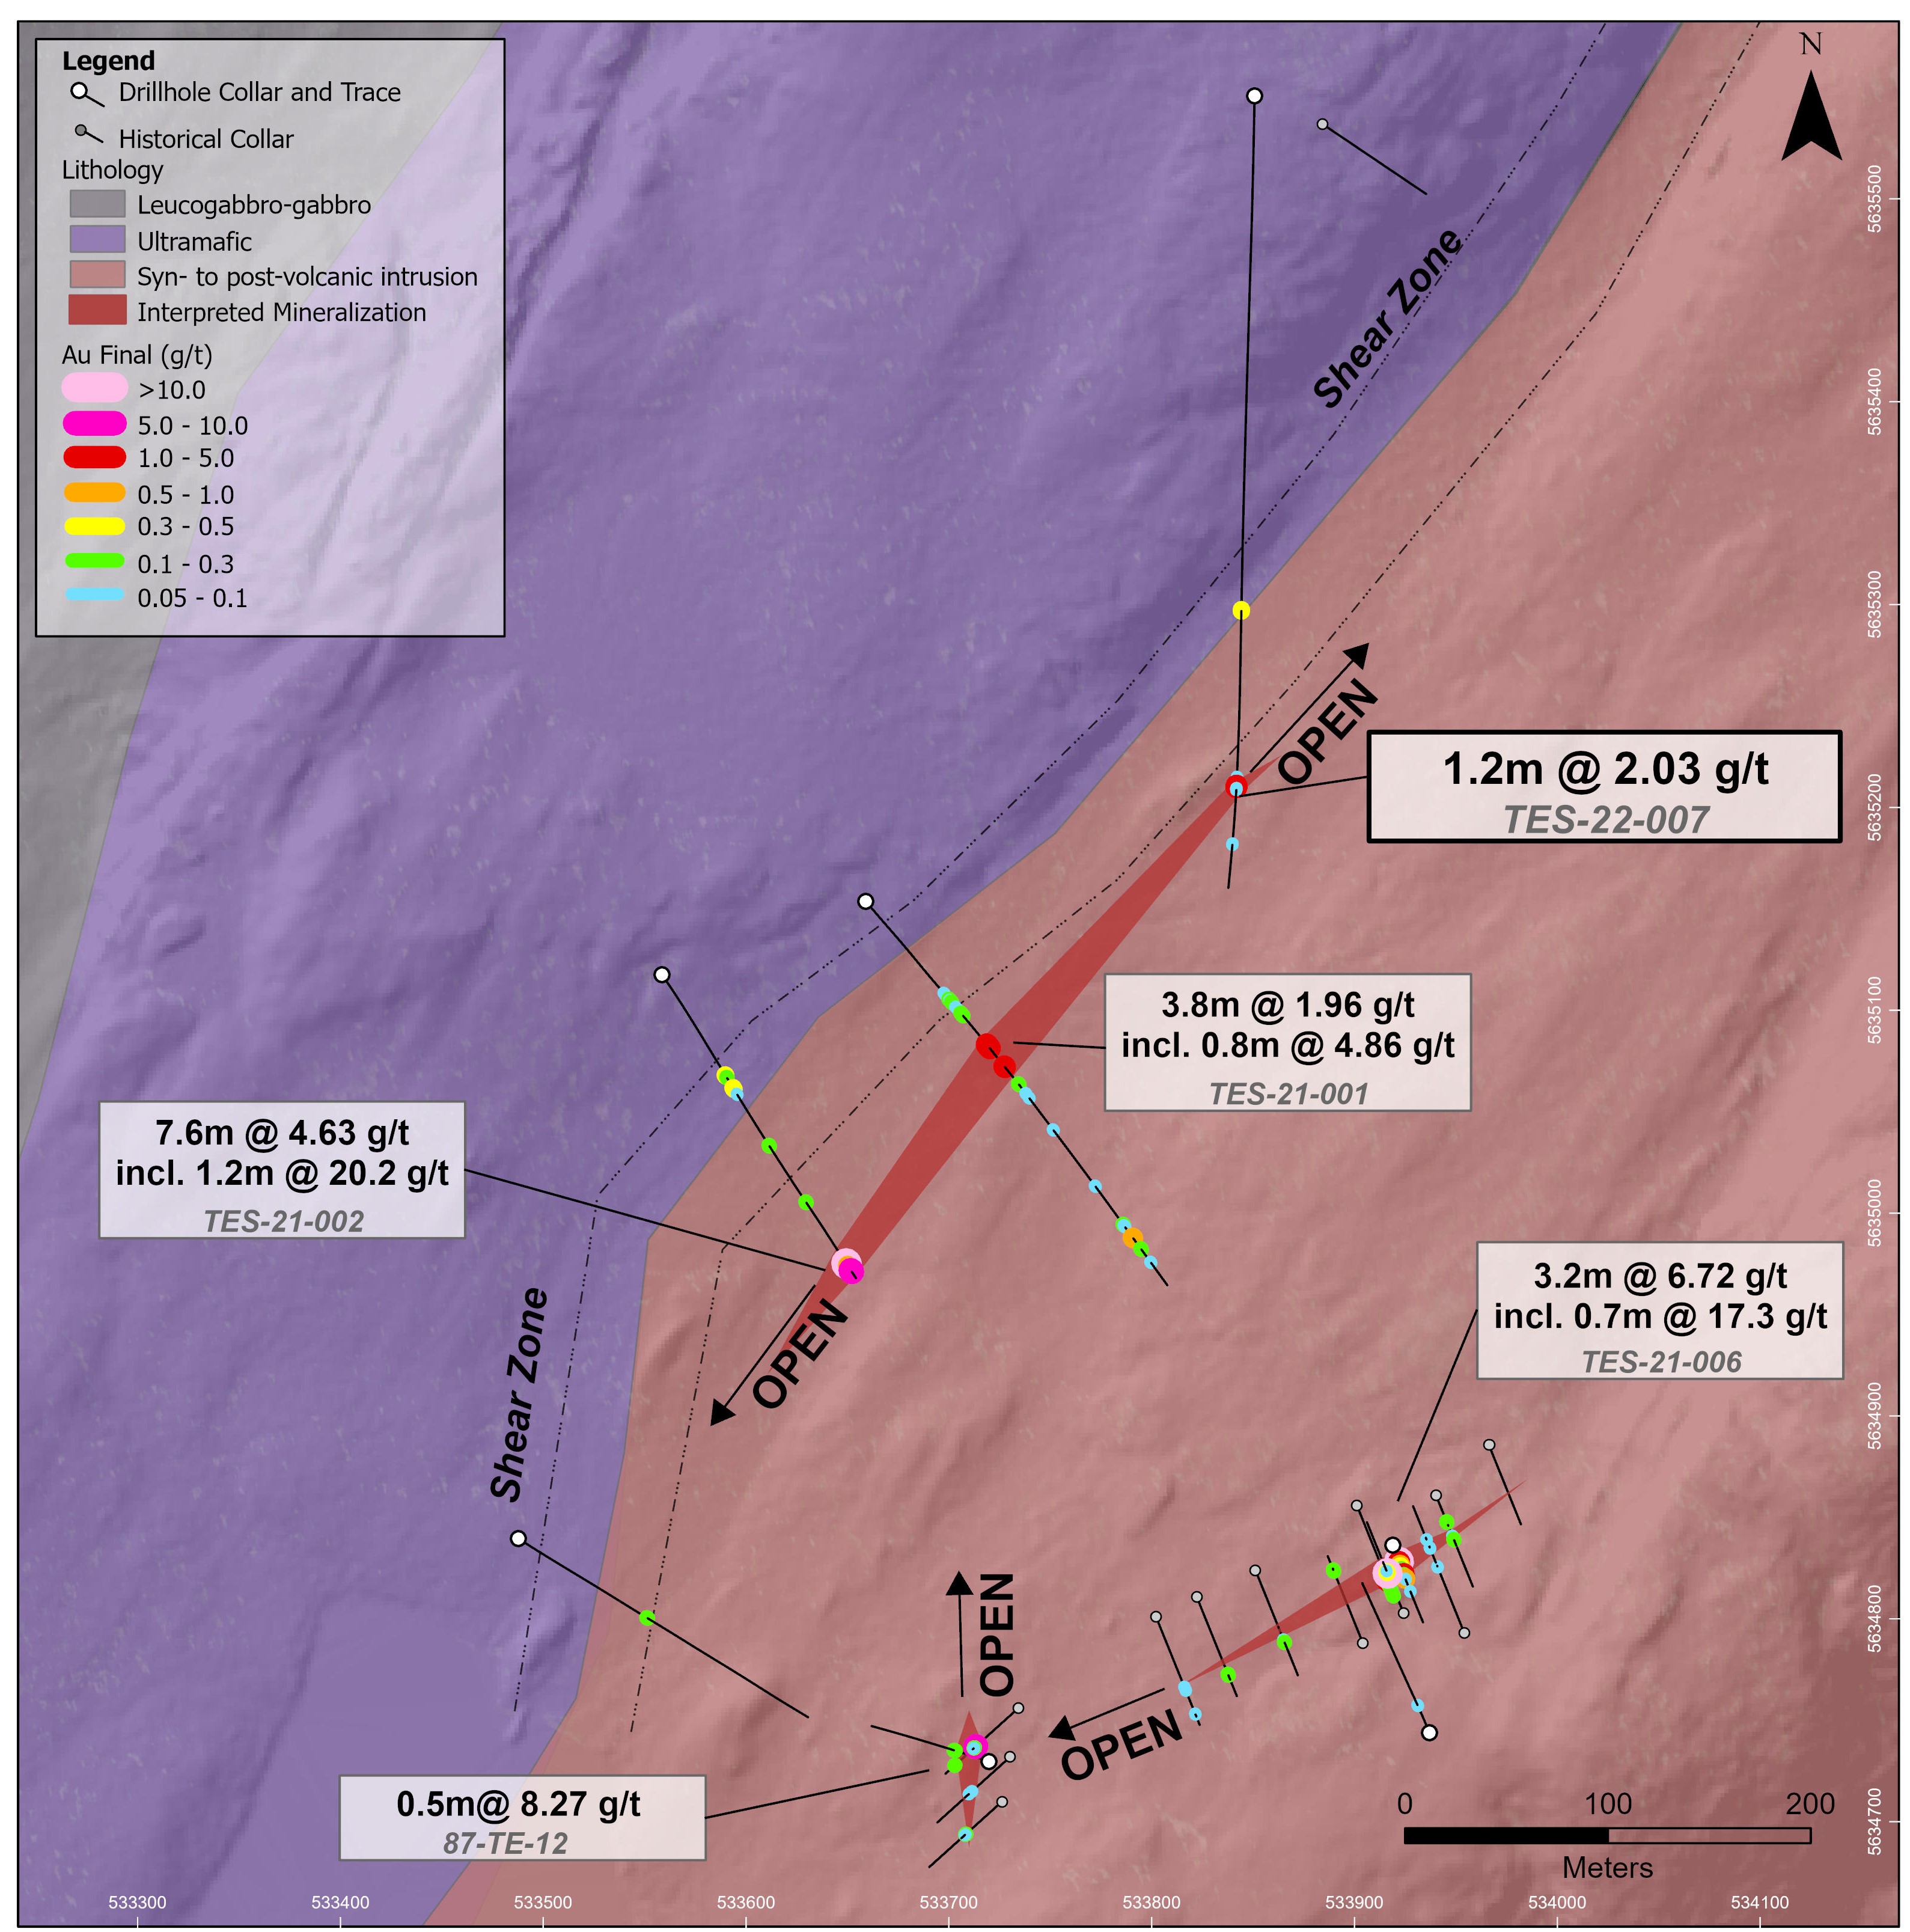 Plan view of Testard with completed drilling and assay results